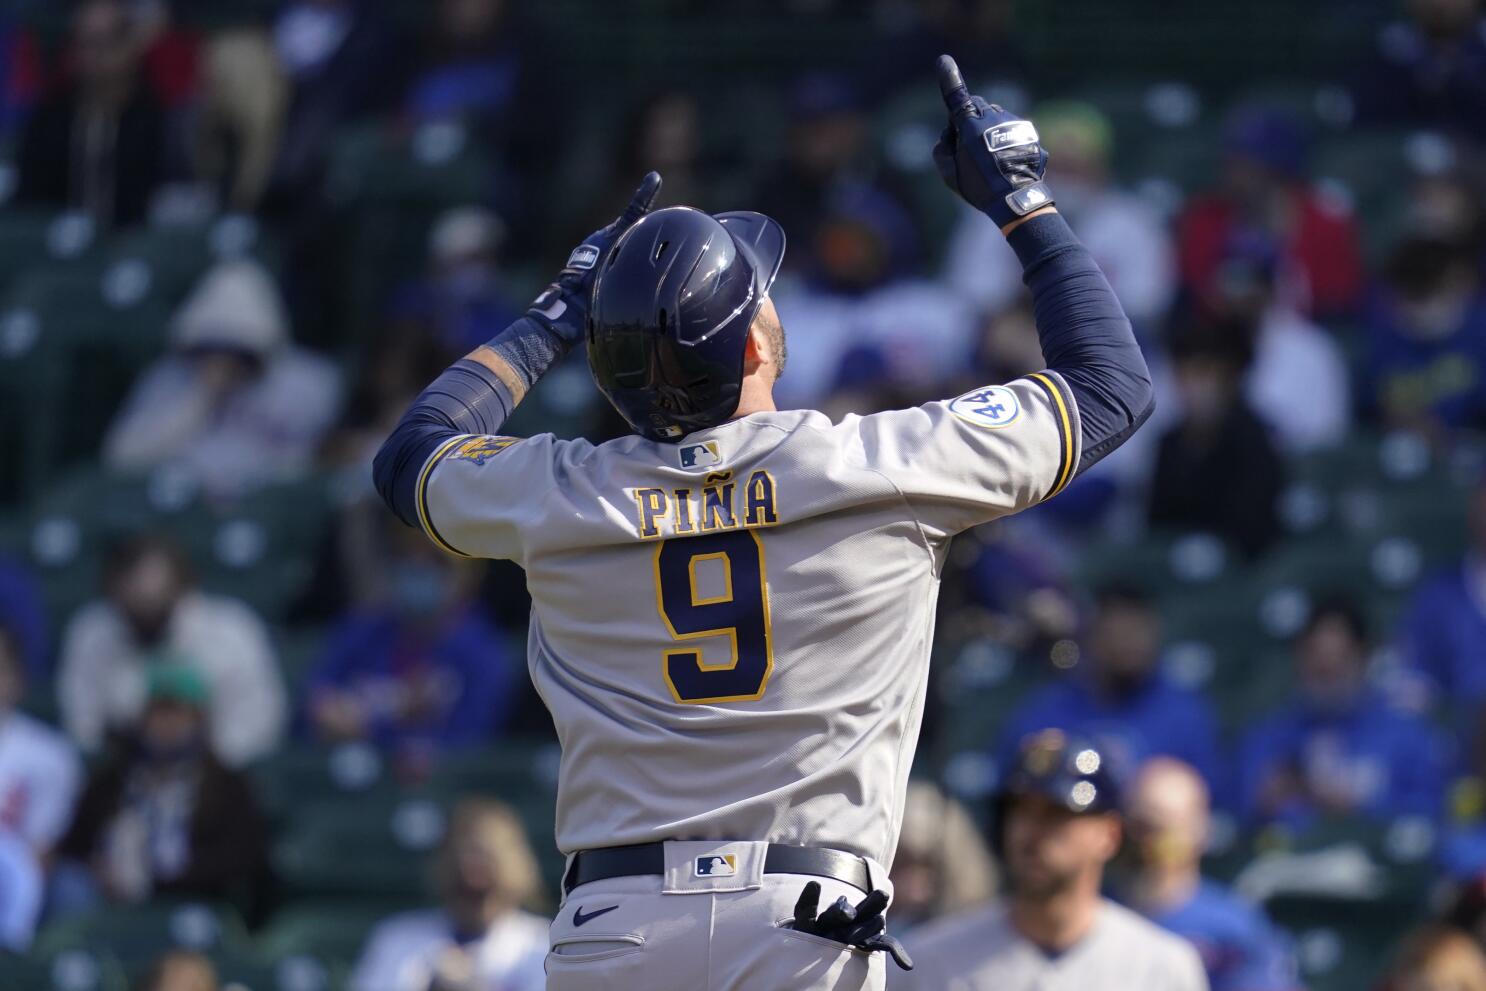 Cubs fall to Brewers, Third Loss in a Row